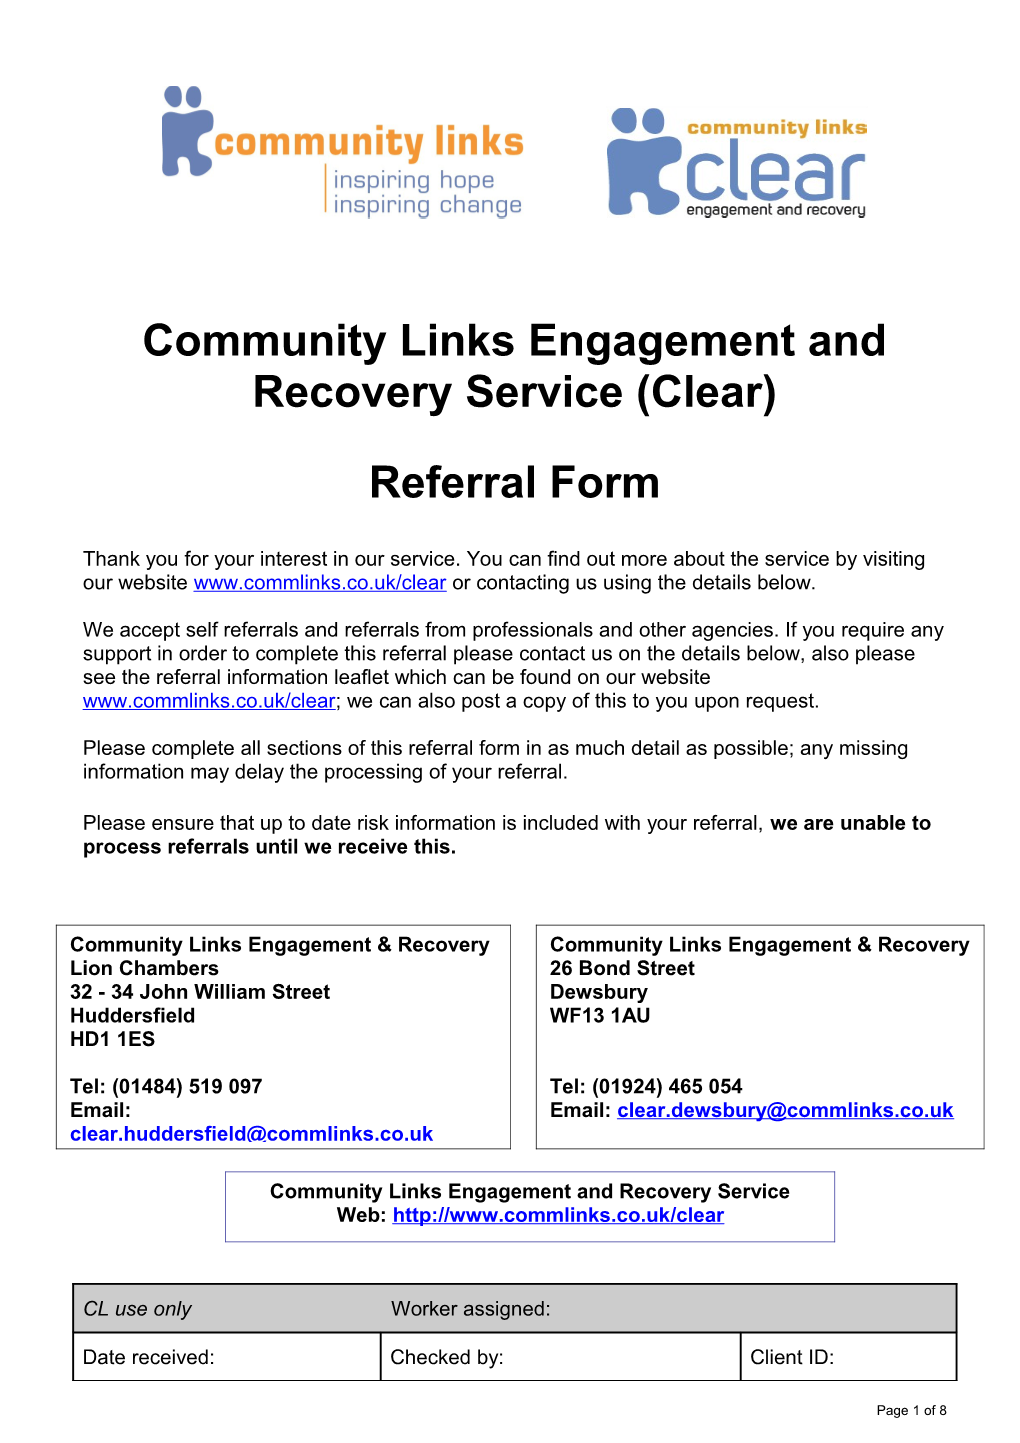 Community Links Engagement and Recovery Service (Clear)